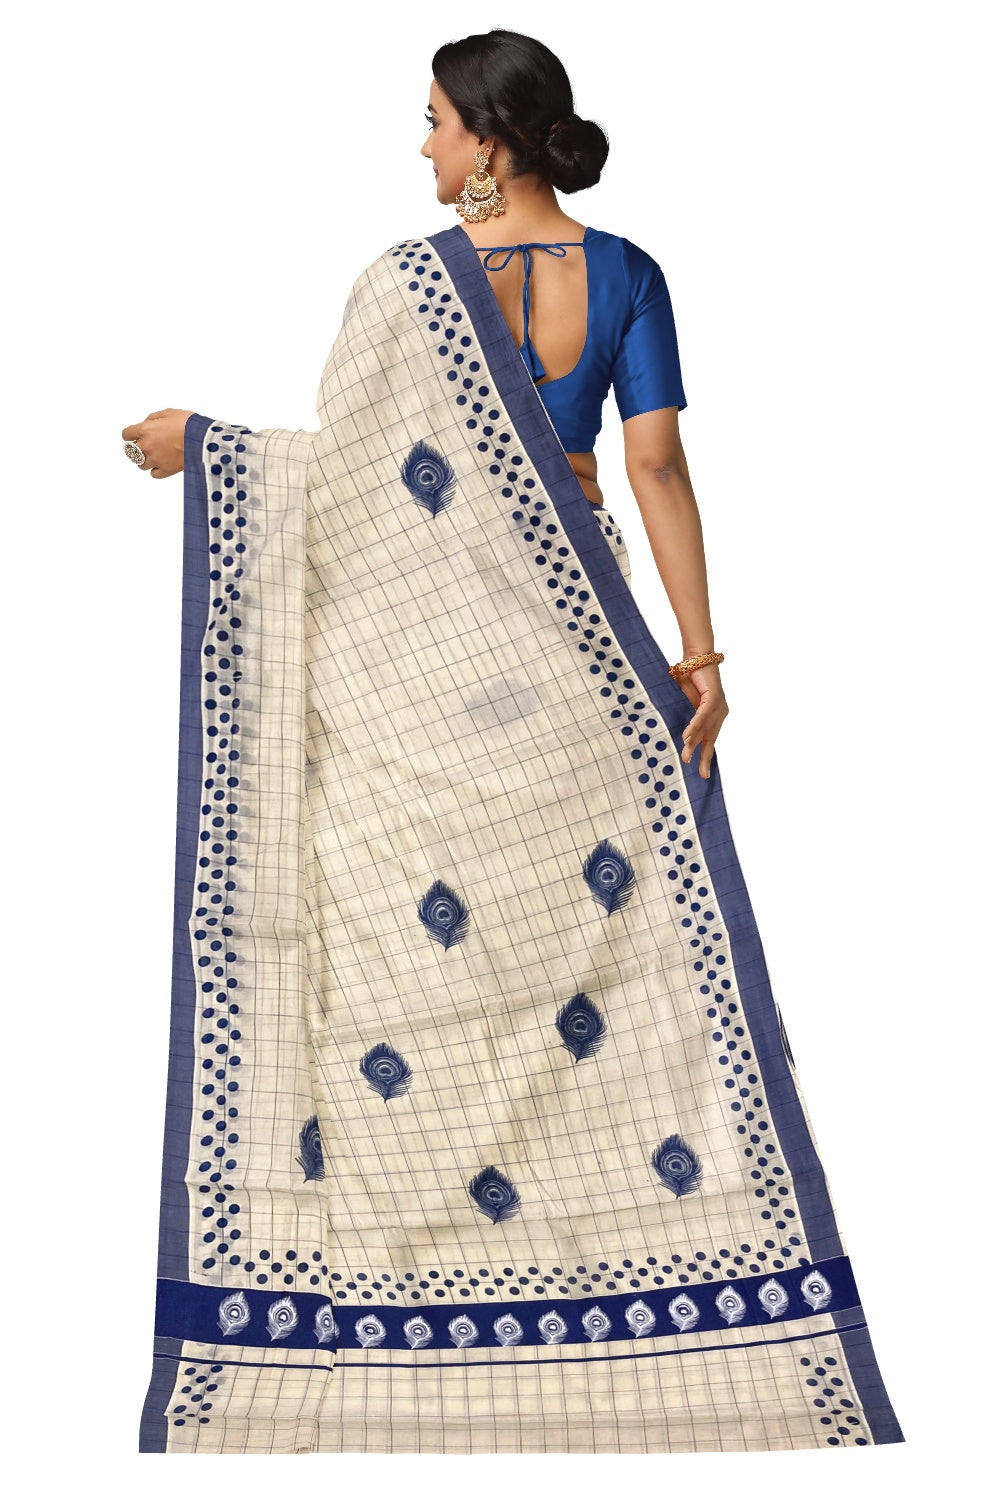 Pure Cotton Check Design Kerala Saree with Blue Polka Dots and Feather Block Prints